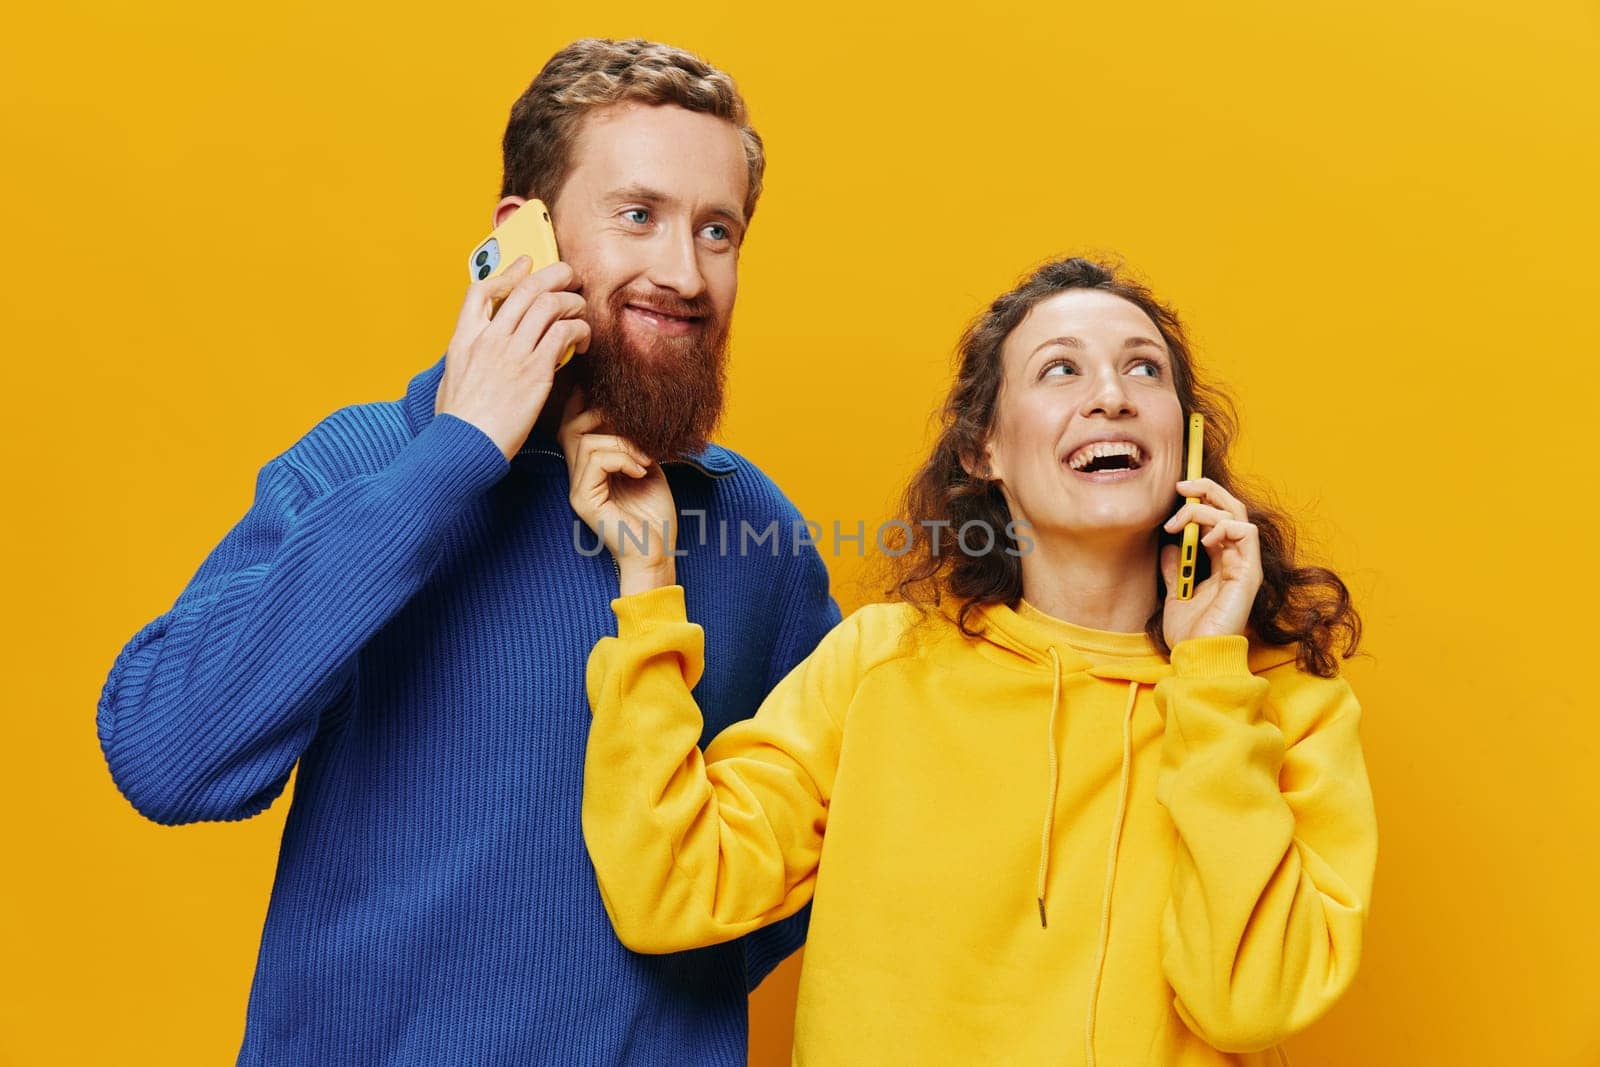 Woman and man cheerful couple with phones in hand talking on cell phone crooked smile cheerful, on yellow background. The concept of real family relationships, talking on the phone, work online. by SHOTPRIME